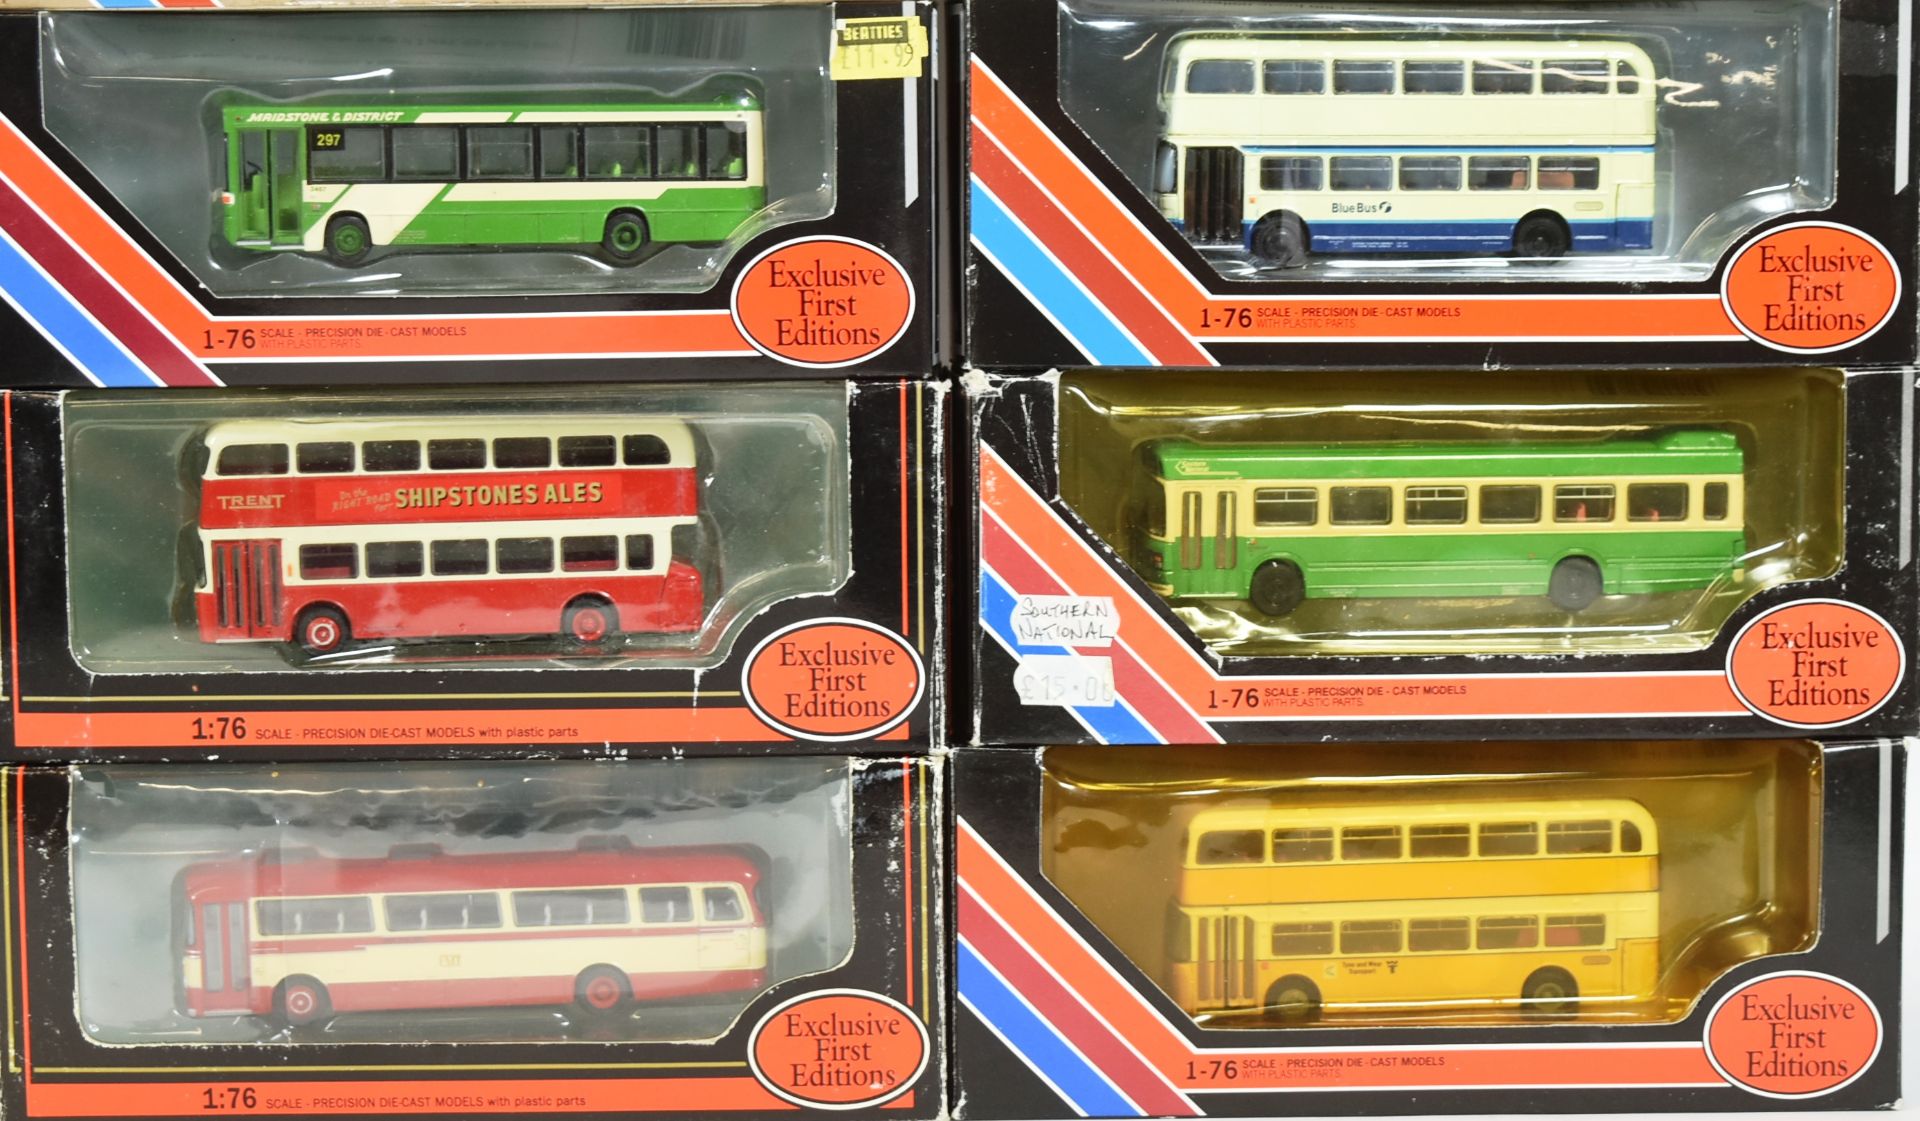 DIECAST - EFE EXCLUSIVE FIRST EDITIONS DIECAST MODEL BUSES - Image 5 of 5